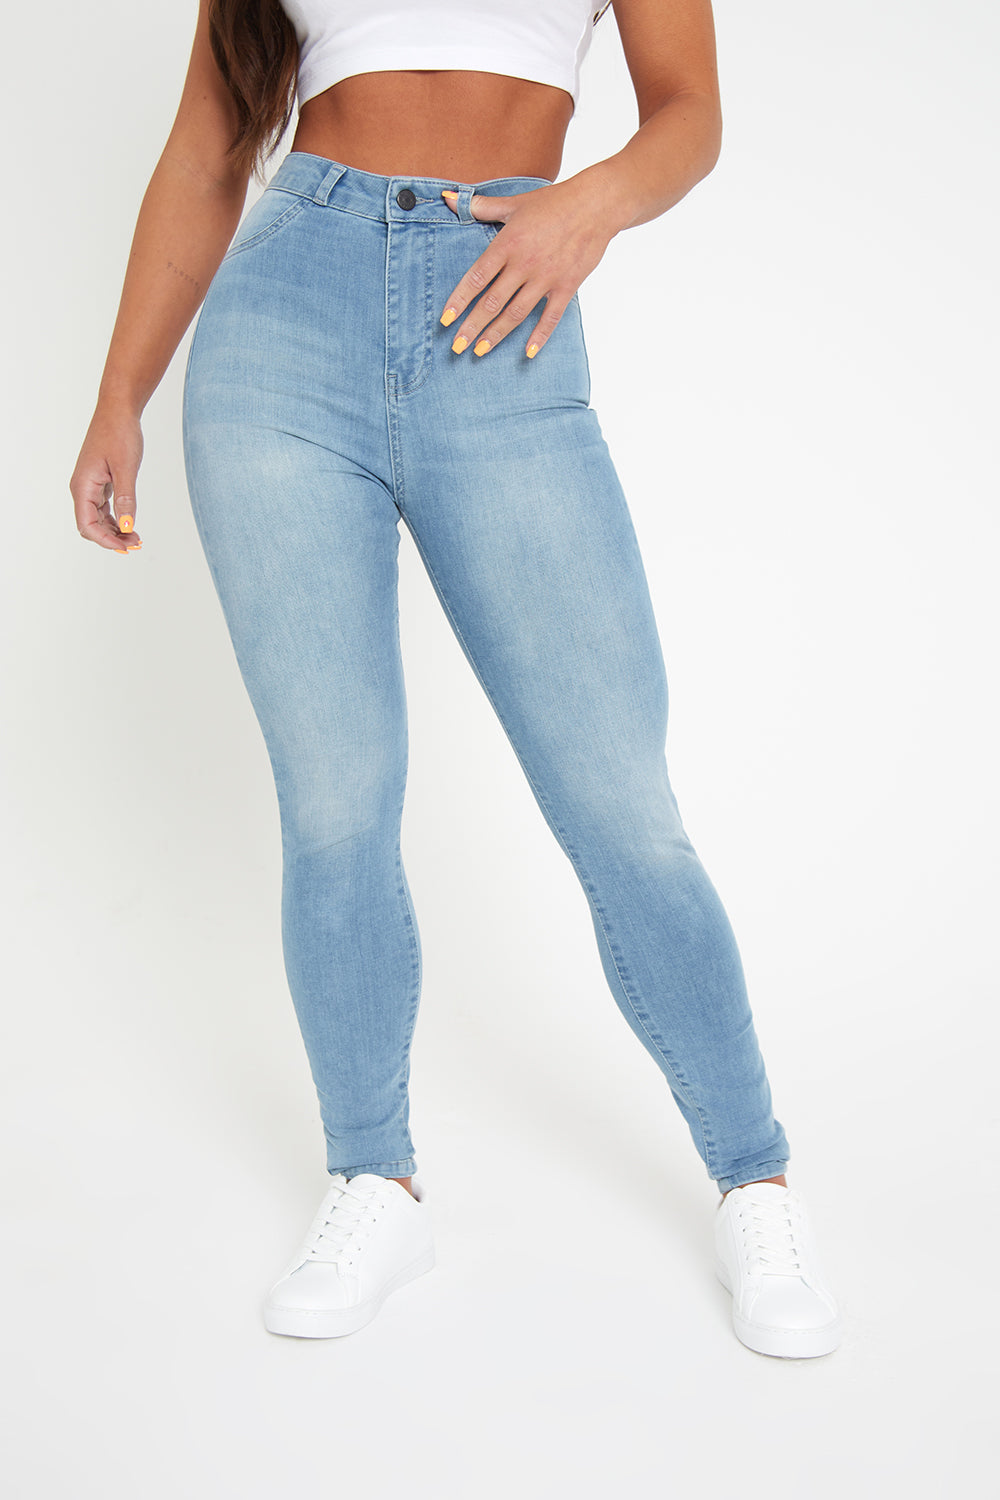 Womens Jeans - TAILORED ATHLETE - ROW